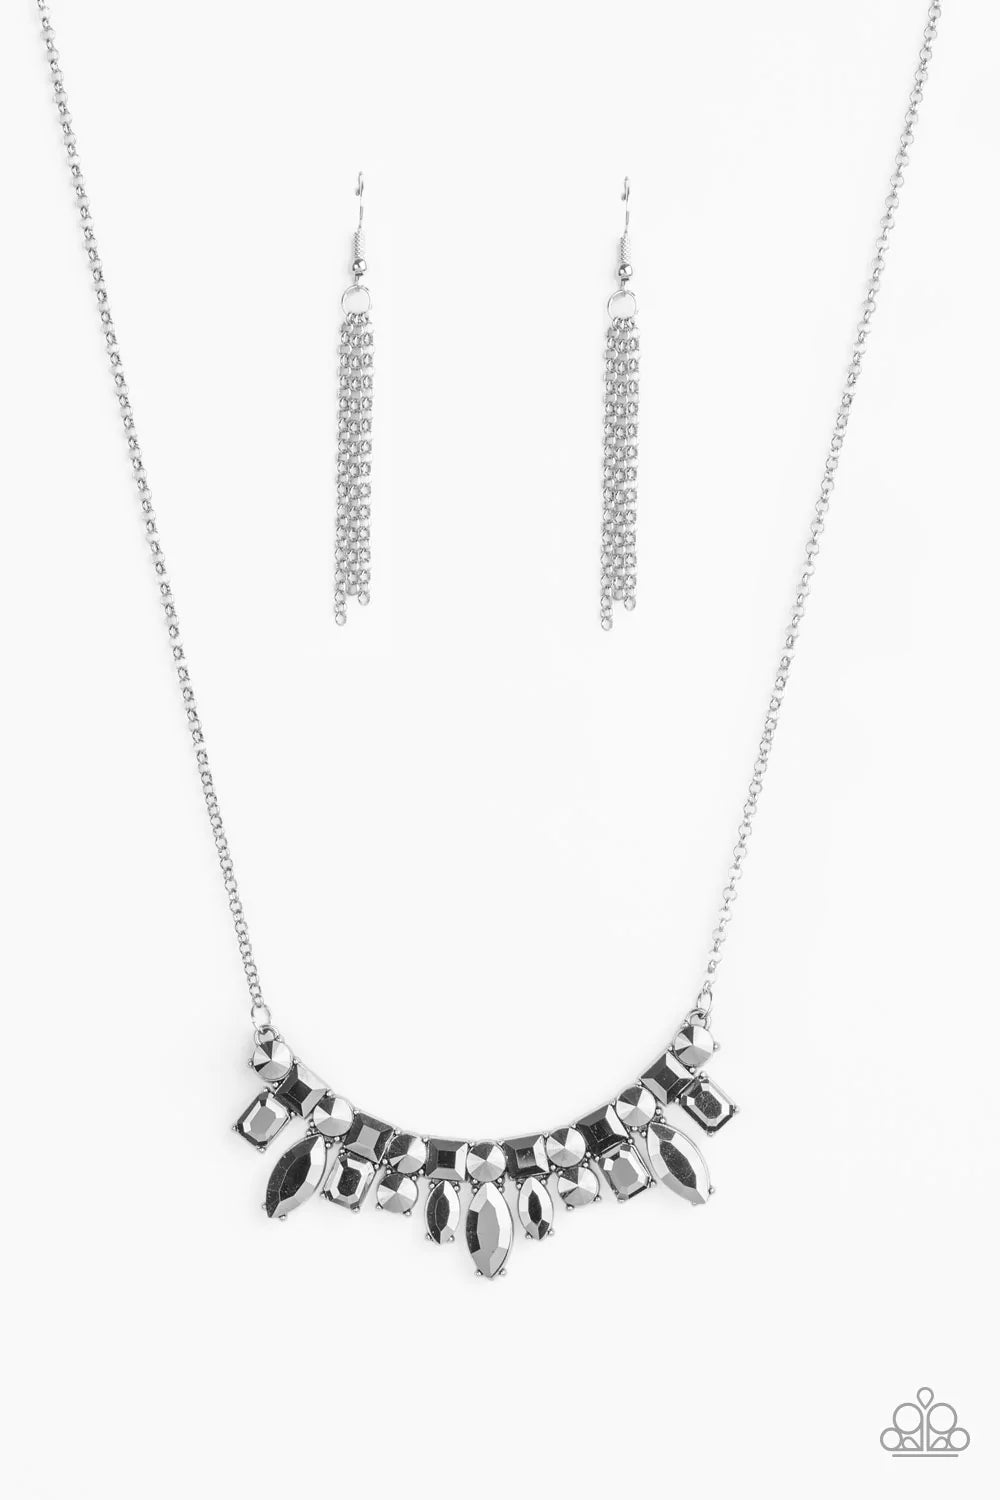 Paparazzi Necklace ~ Wish Upon a ROCK STAR - Silver